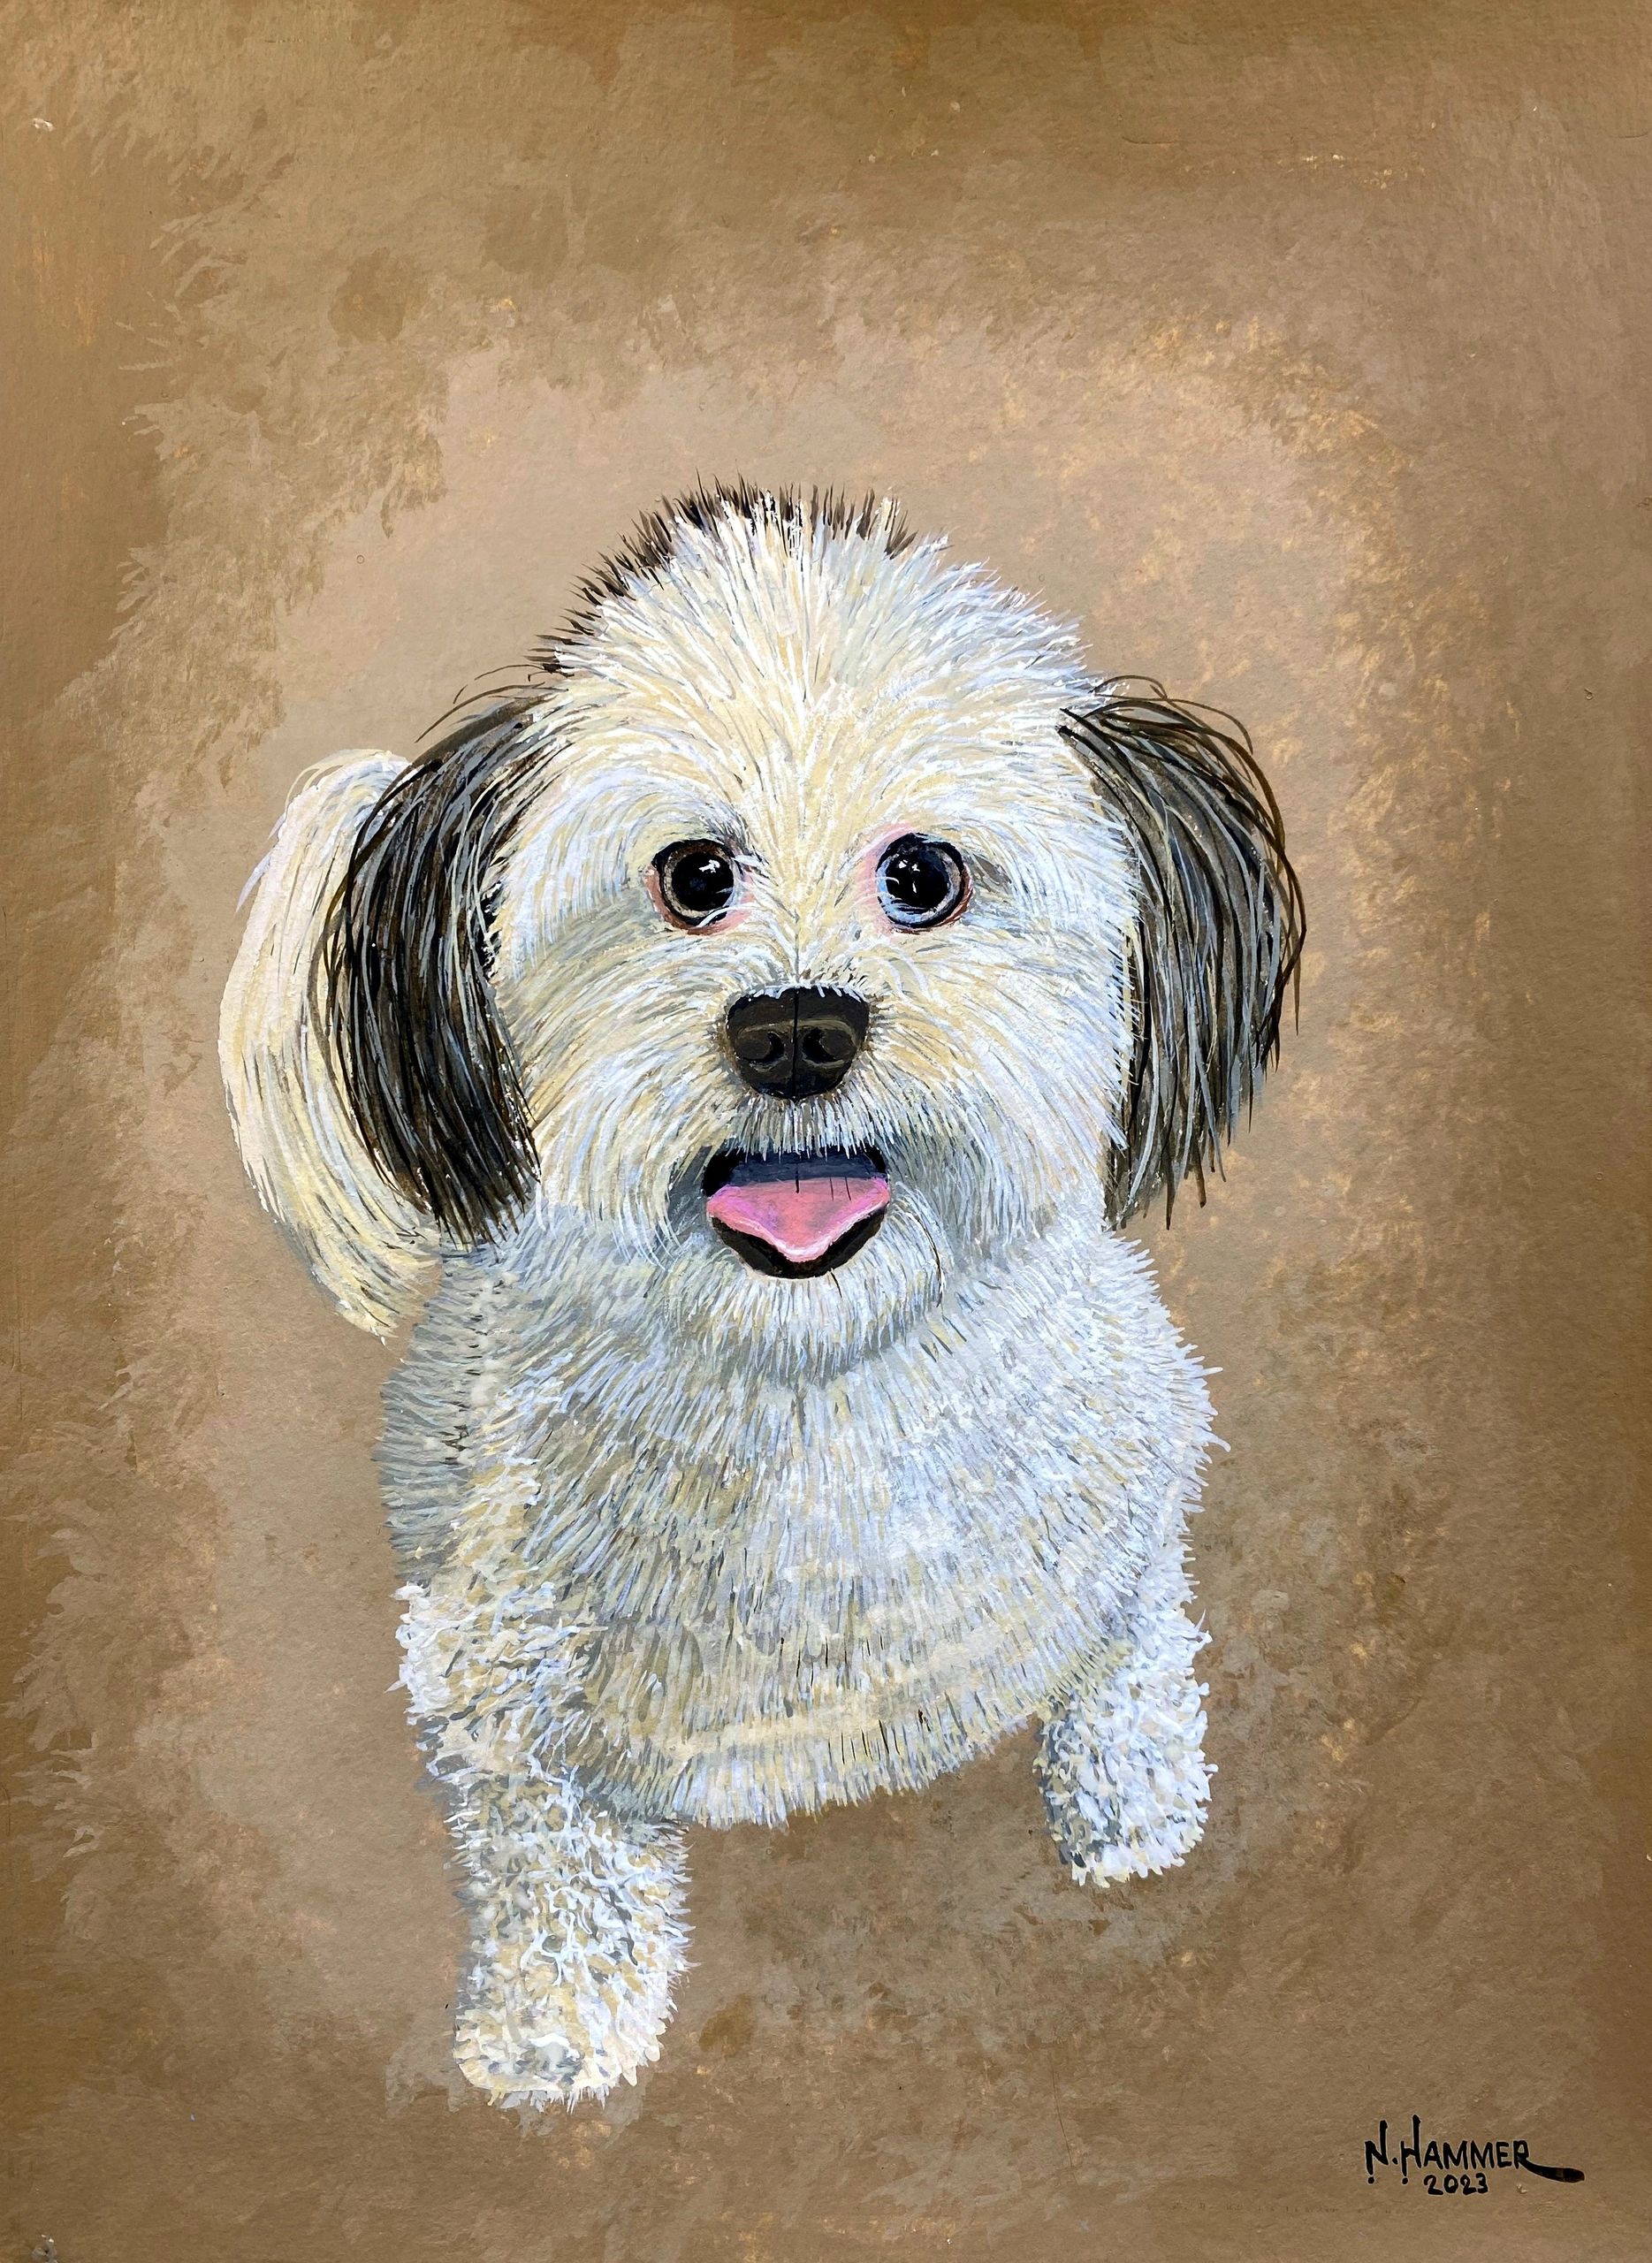 A neighbor in my building owns this adorable 4-year-old Havanese. She commissioned me to do this por